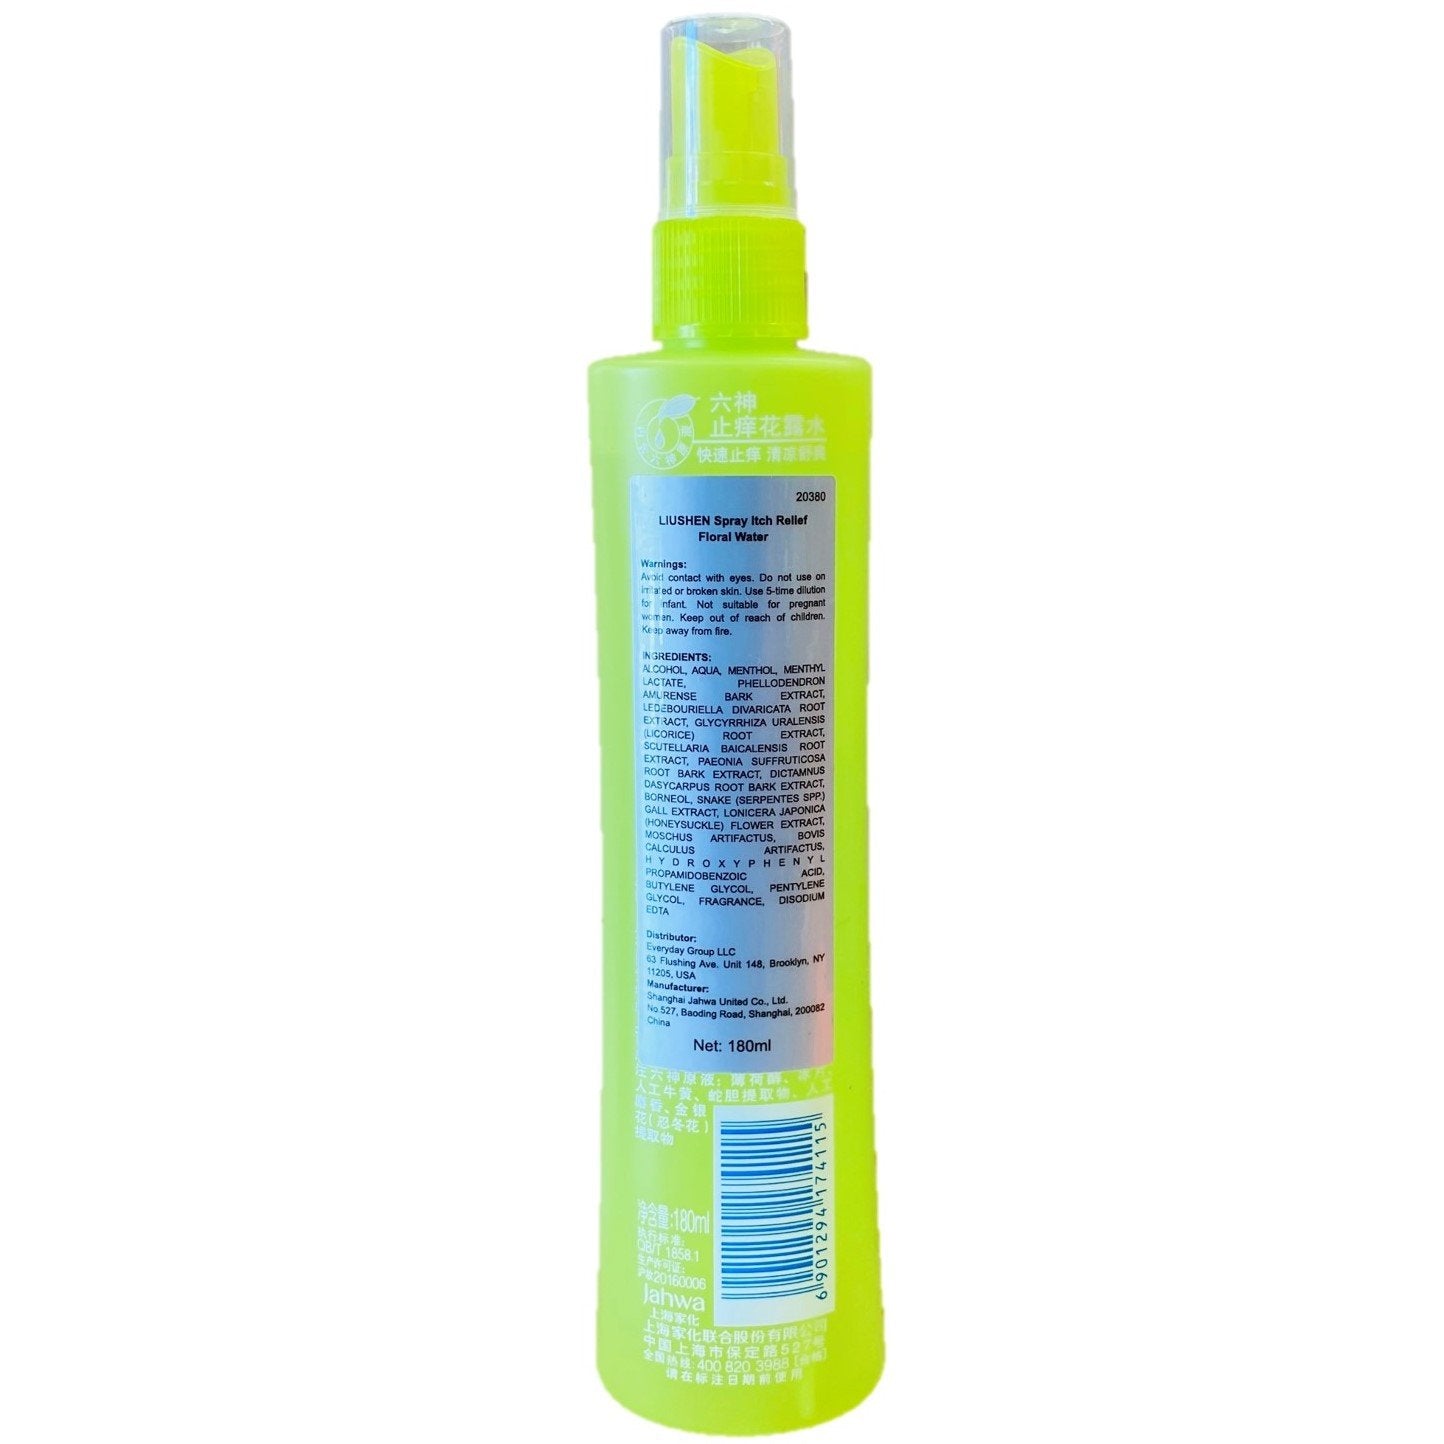 Liushen Flora Water Itching Relief Spray (180ml) - Buy at New Green Nutrition